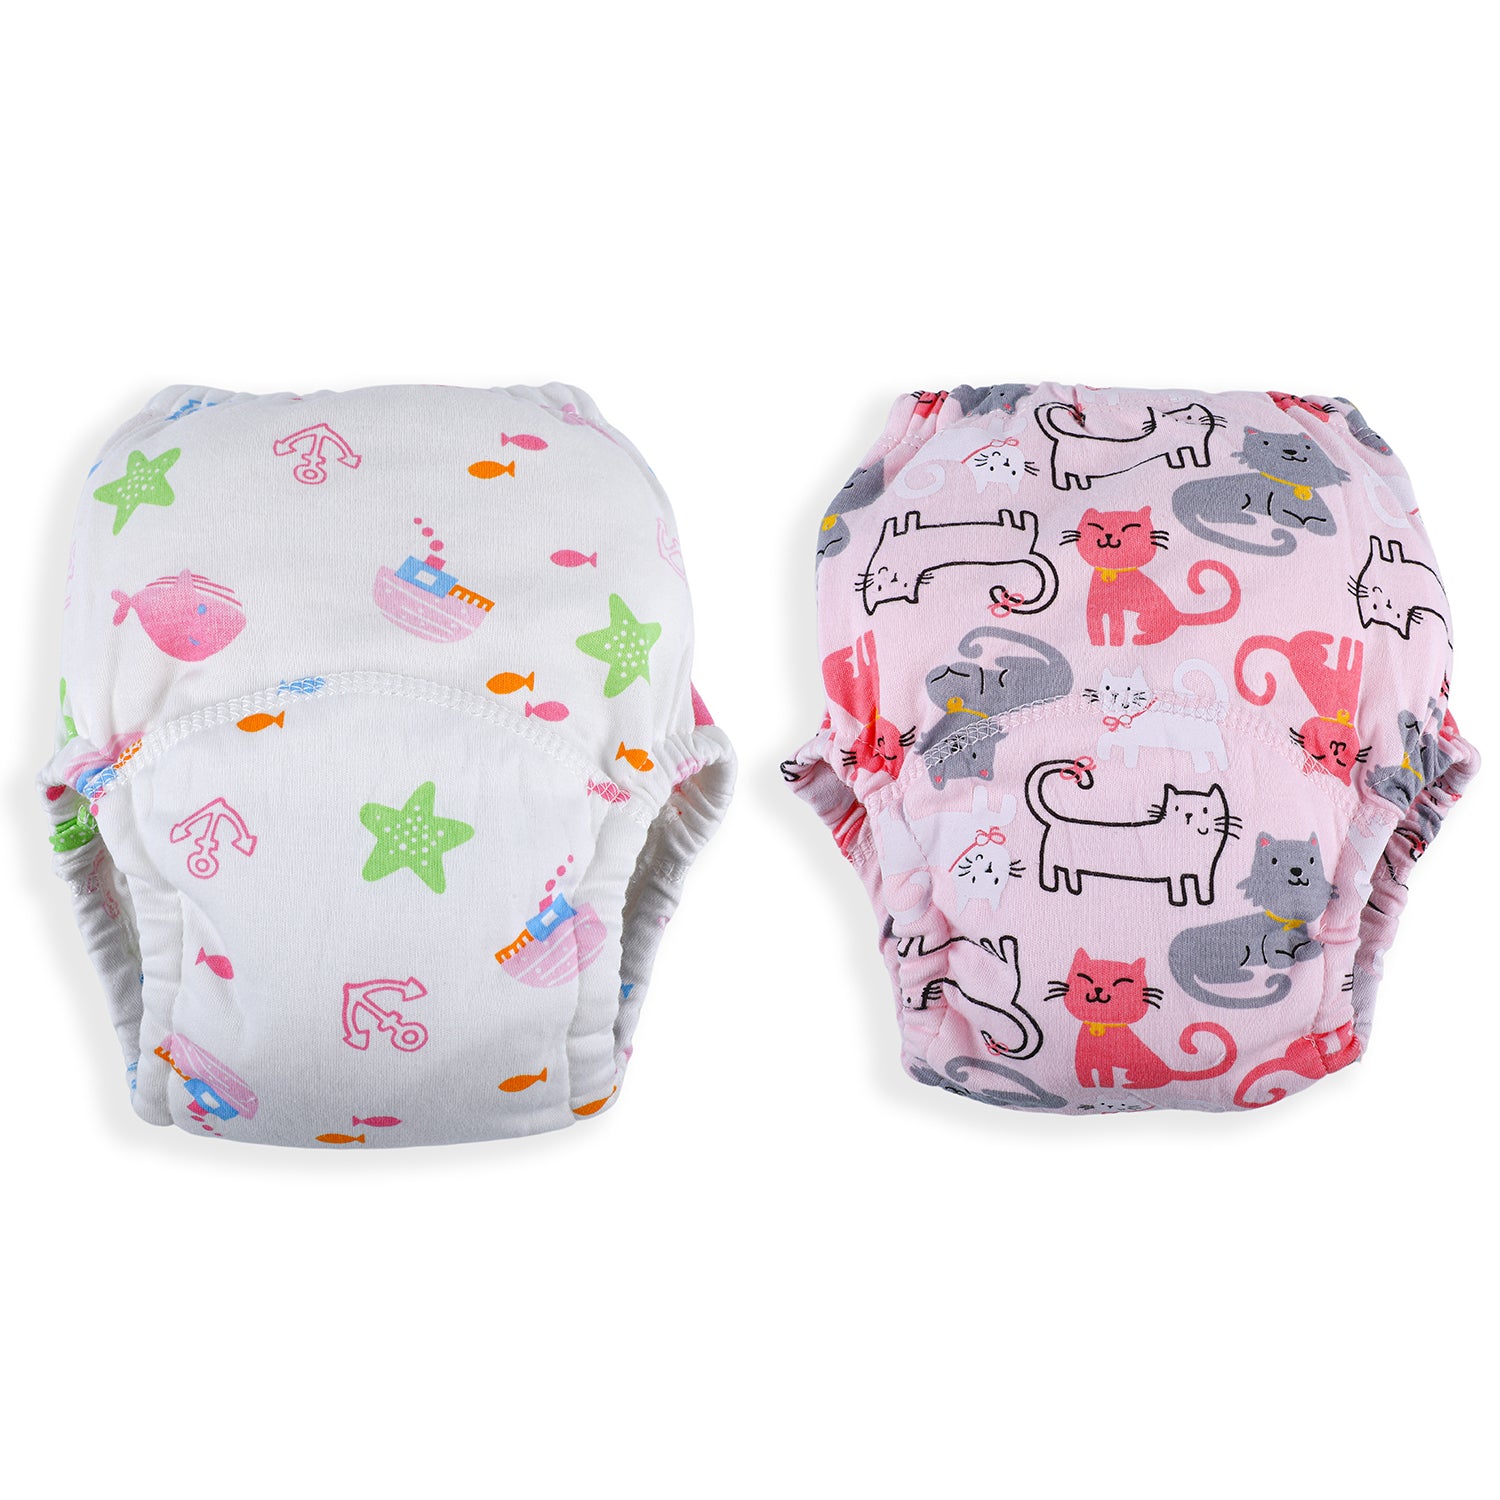 2 Pieces/lot Baby Training Pants 4 Layers Baby Cloth Diaper Reusable  Washable Cotton Elastic Waist Cloth Diapers 8-18KG Nappy - AliExpress